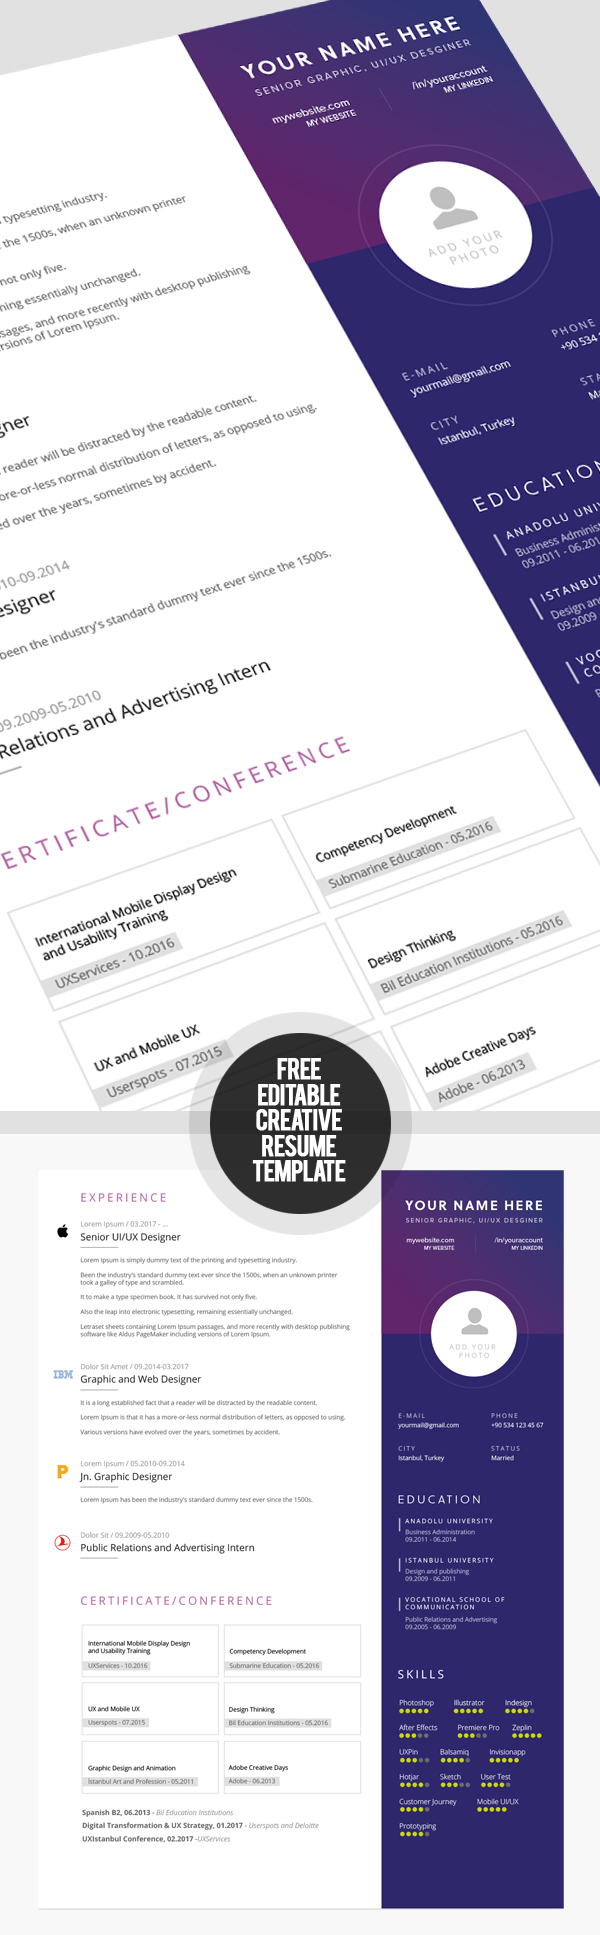 50 Free Resume Templates: Best Of 2018 -  19